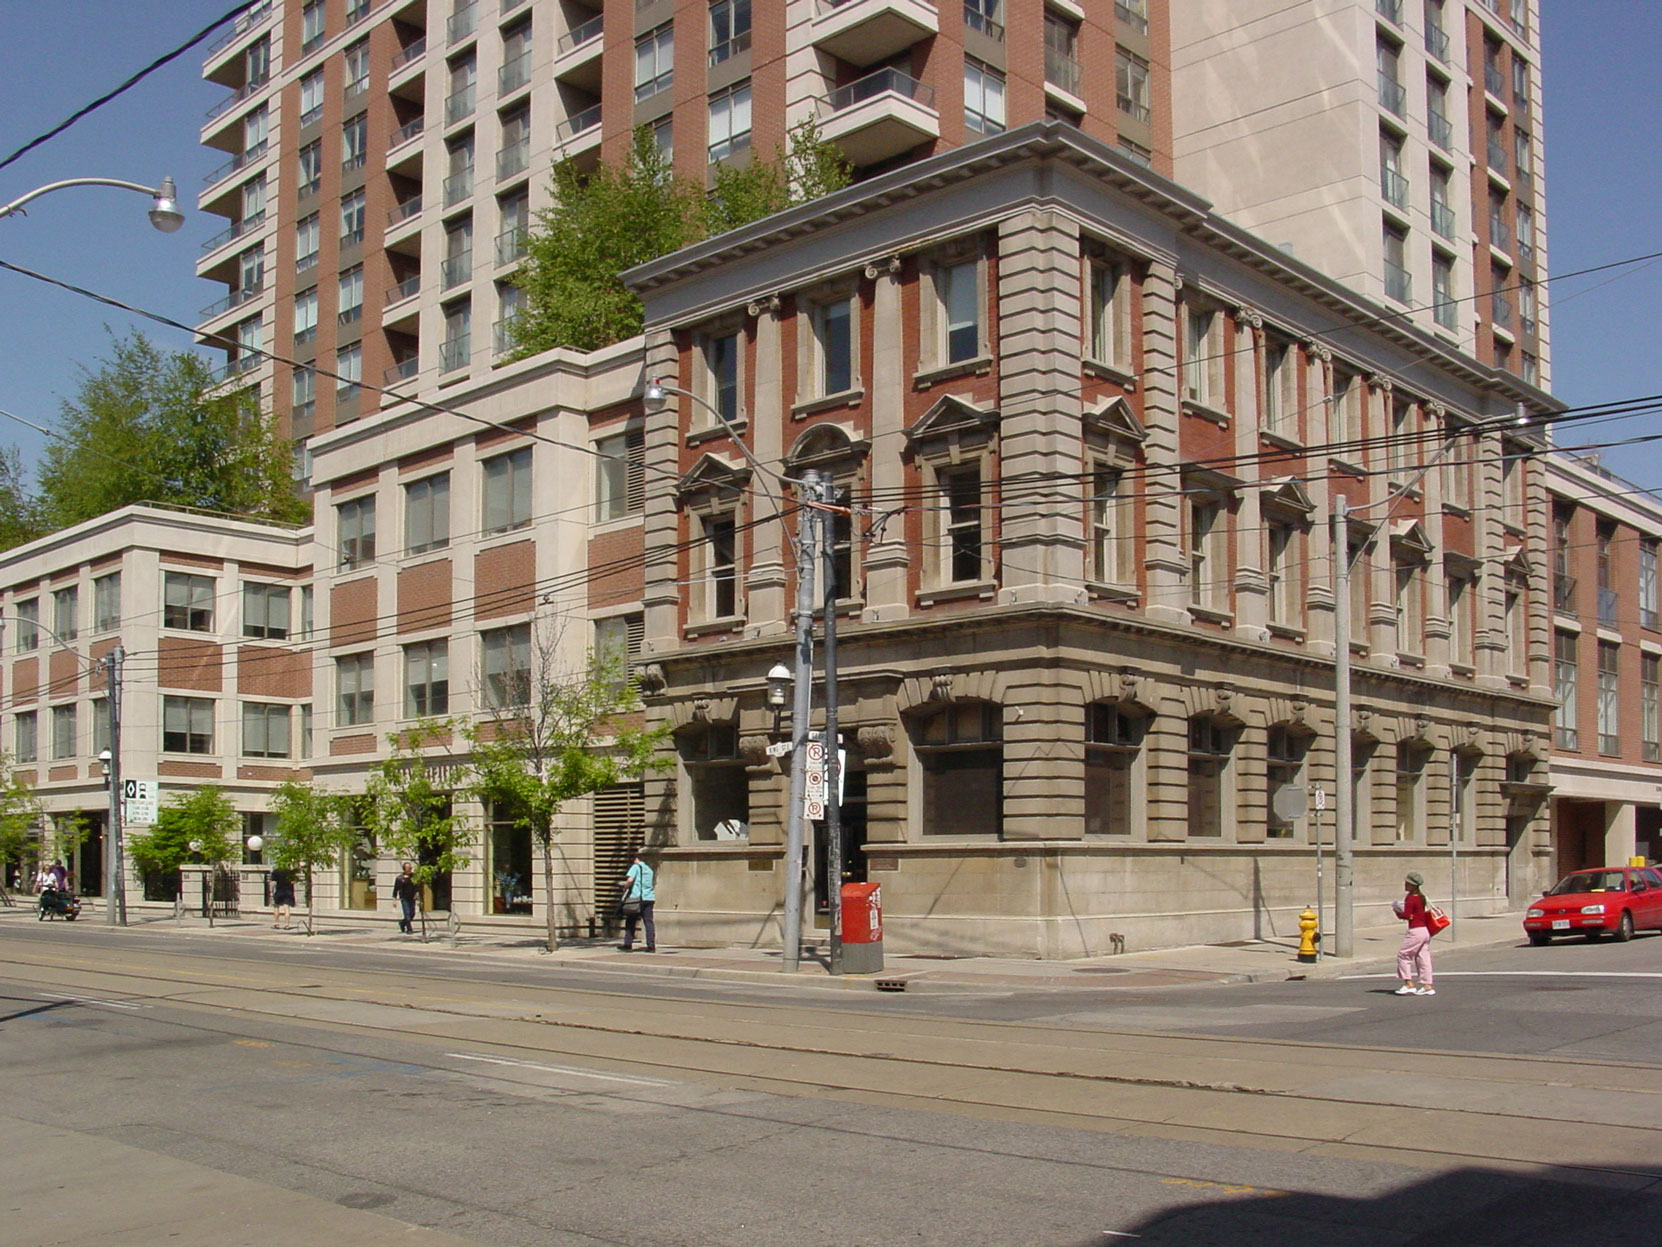 The site of Nipissing House, now 172 King Street East, as it appears today. (Photo by Author)